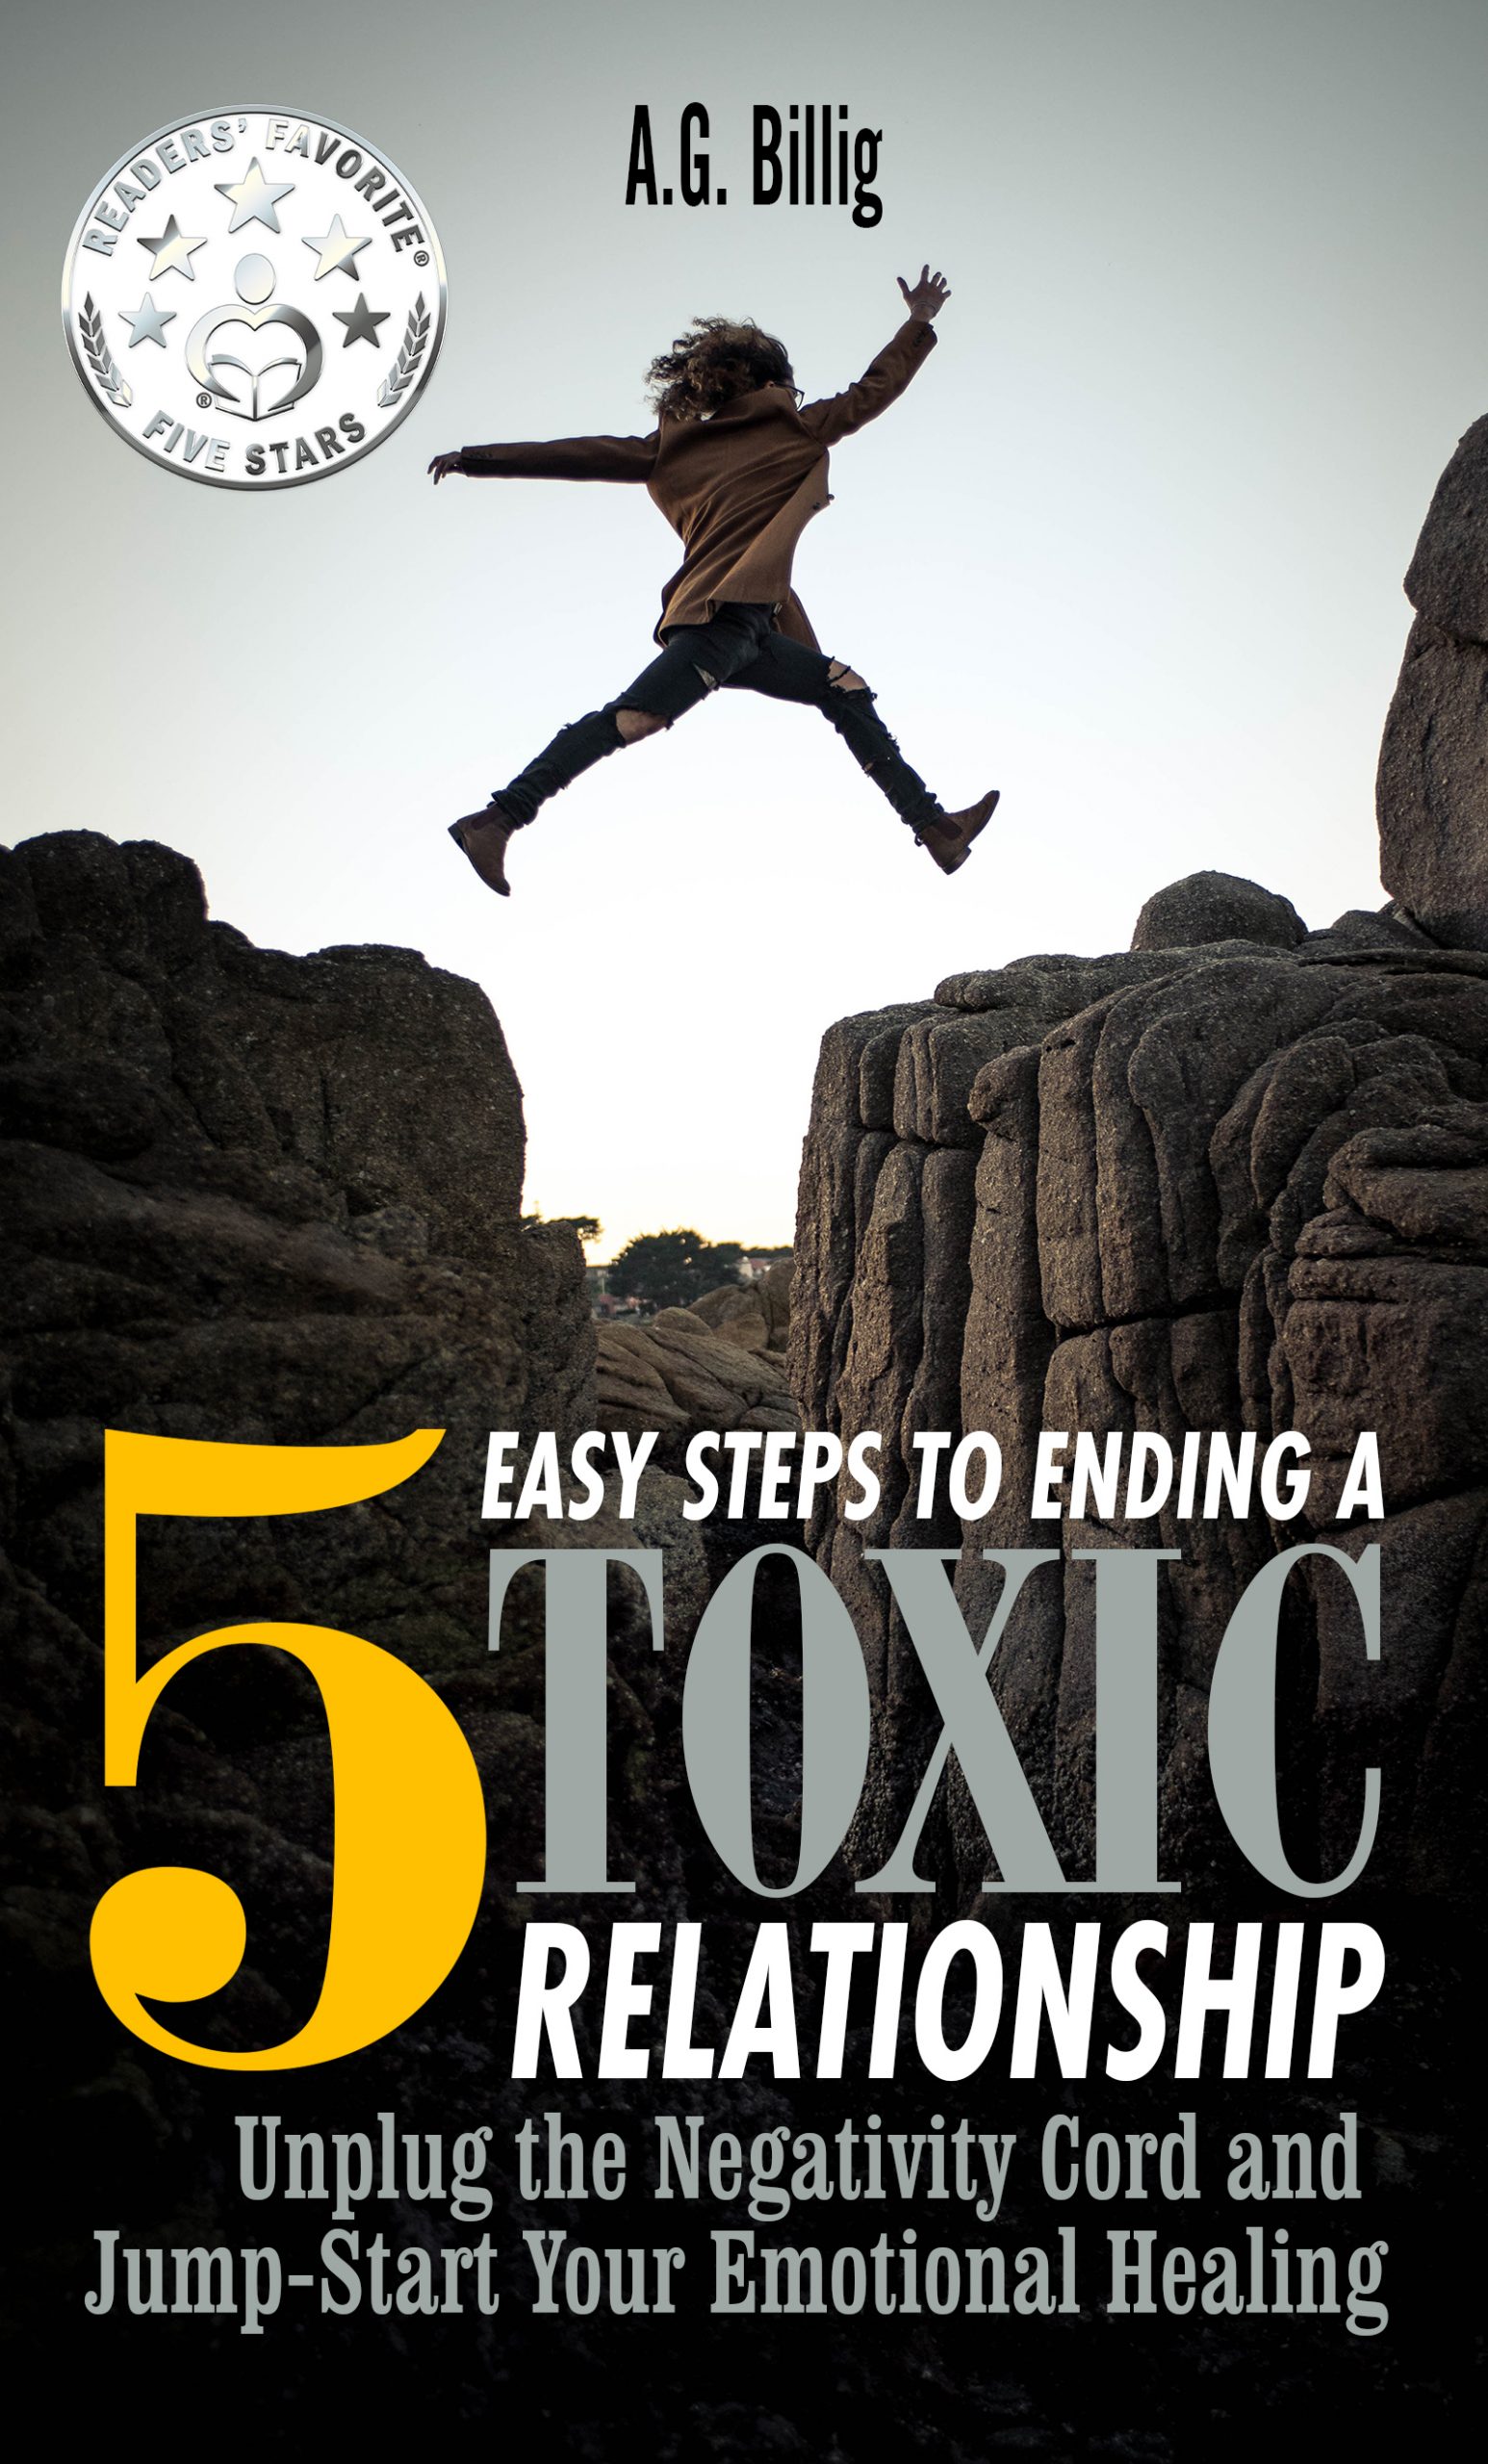 5 EASY STEPS TO ENDING A TOXIC RELATIONSHIP: UNPLUG THE NEGATIVITY CHORD AND JUMPSTART YOUR EMOTIONAL HEALING